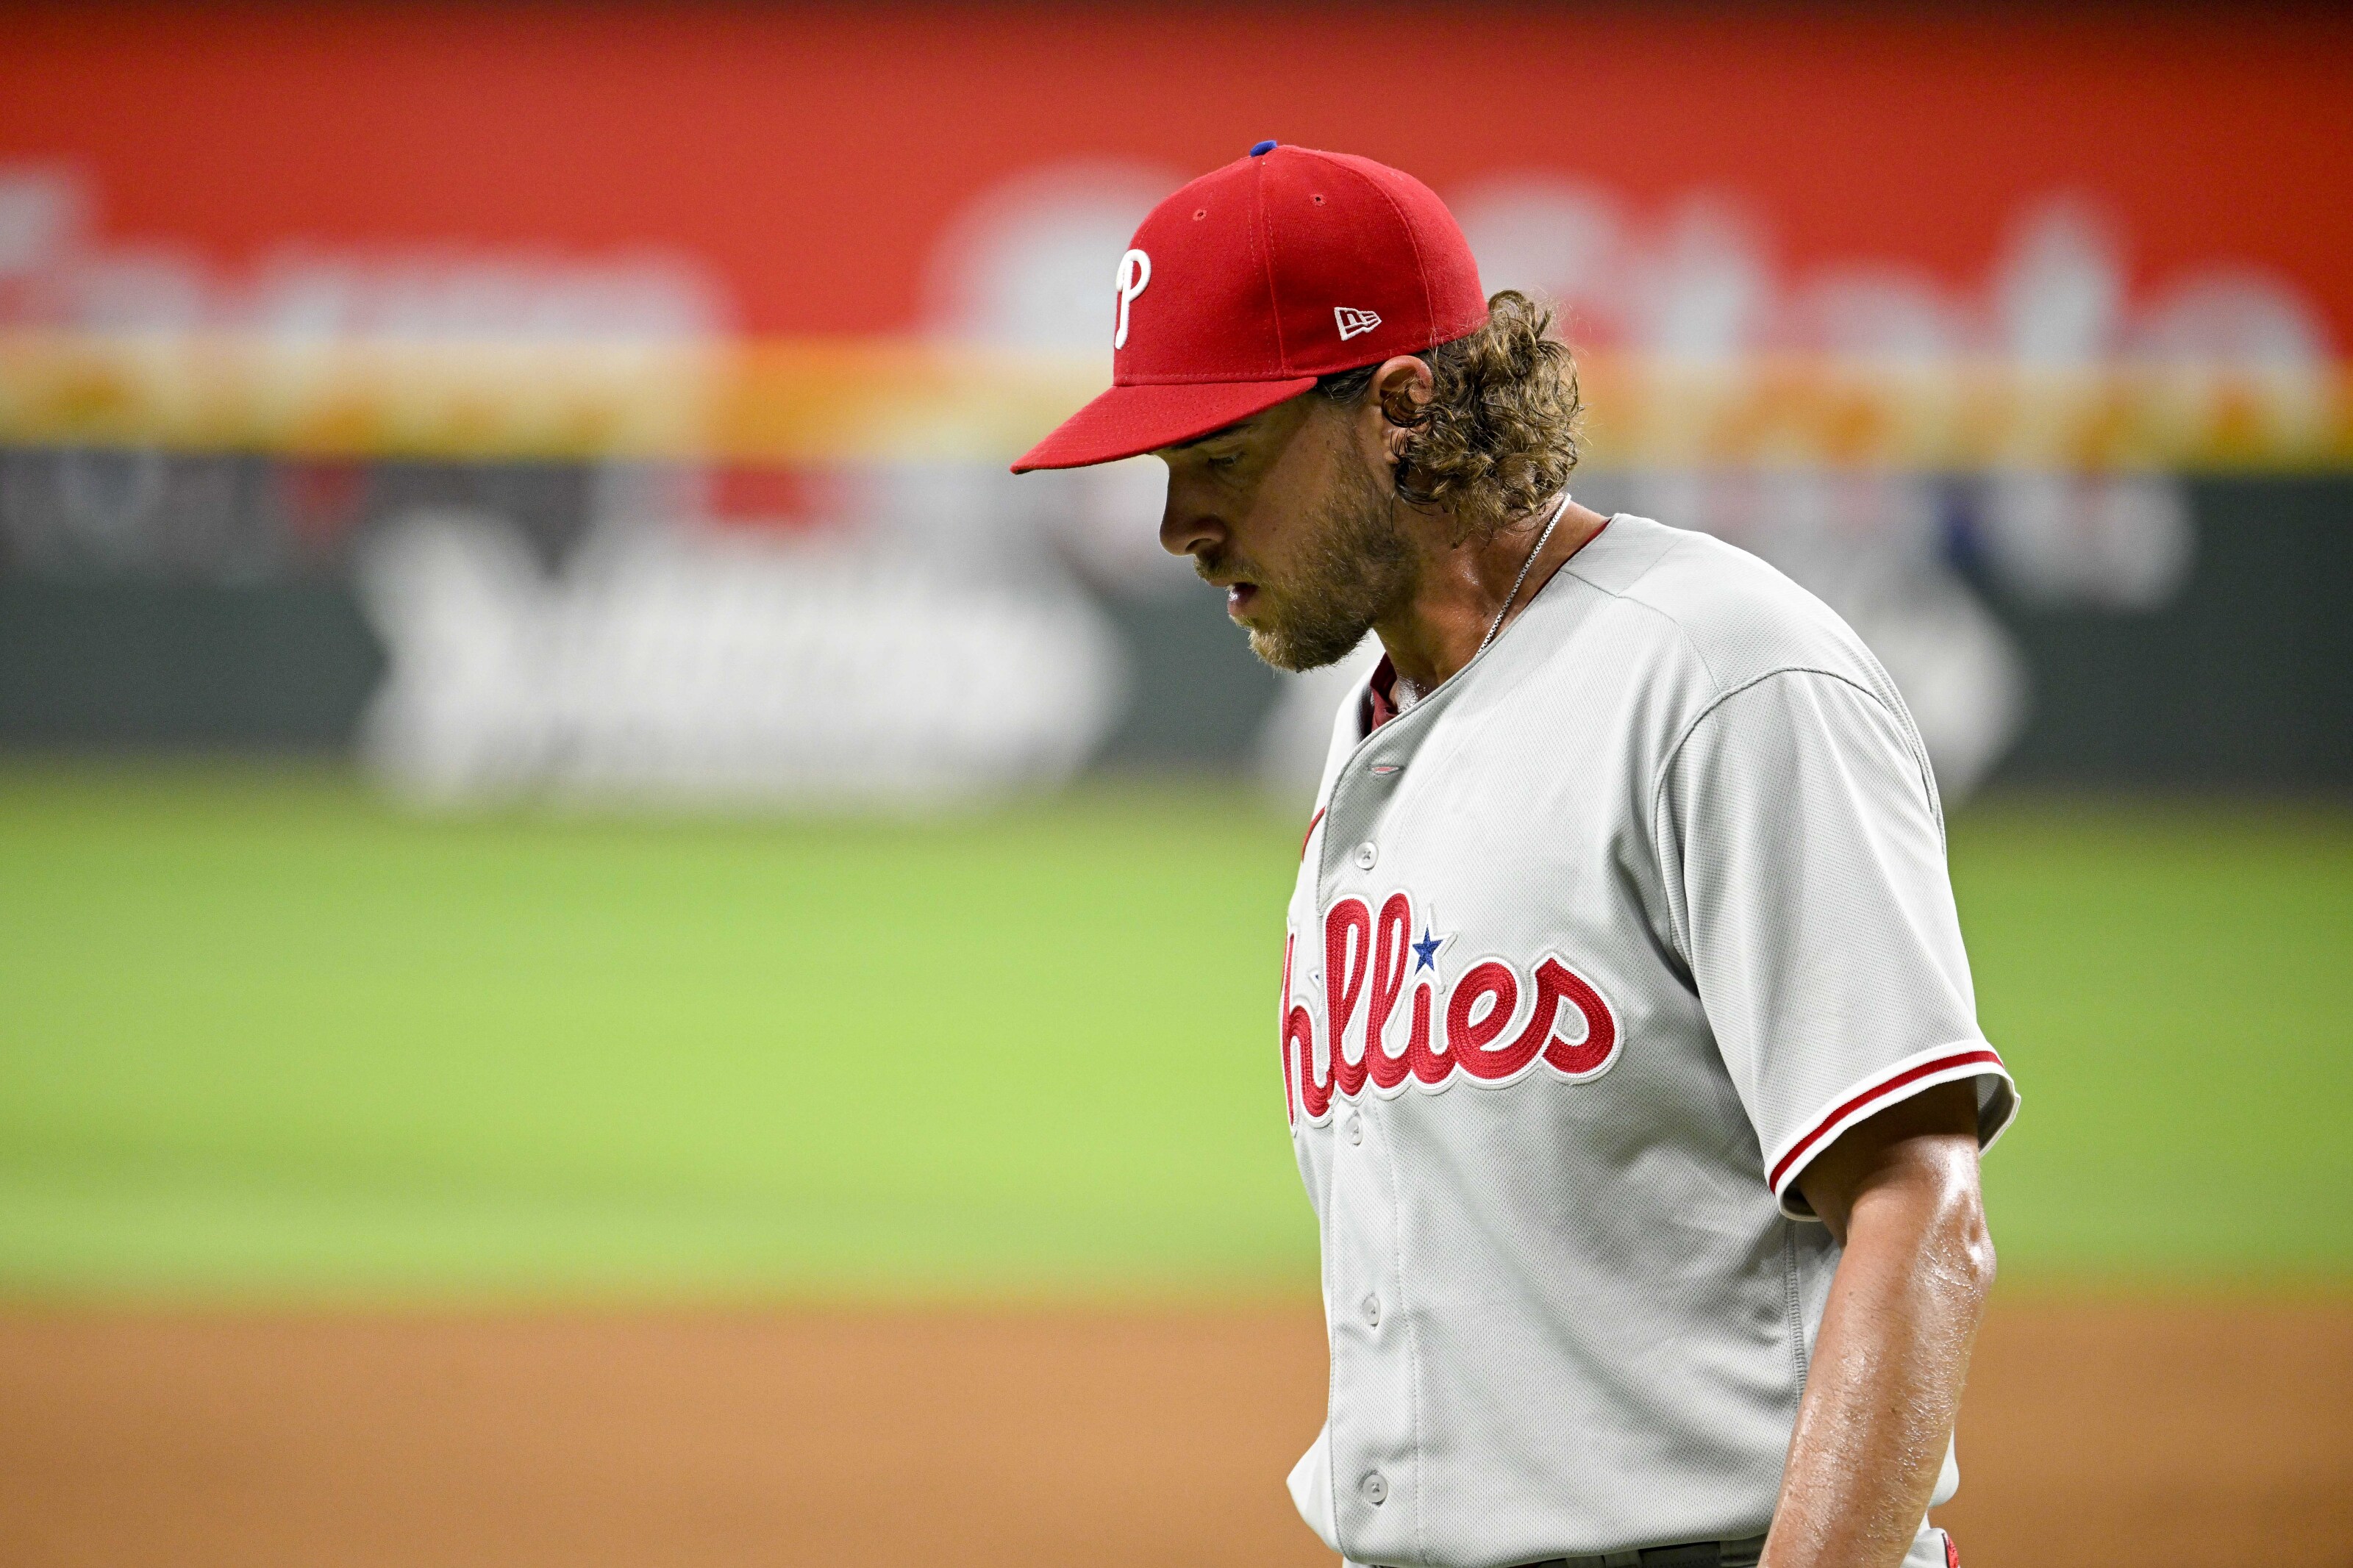 Philadelphia Phillies: Aaron Nola and that darned pitch clock